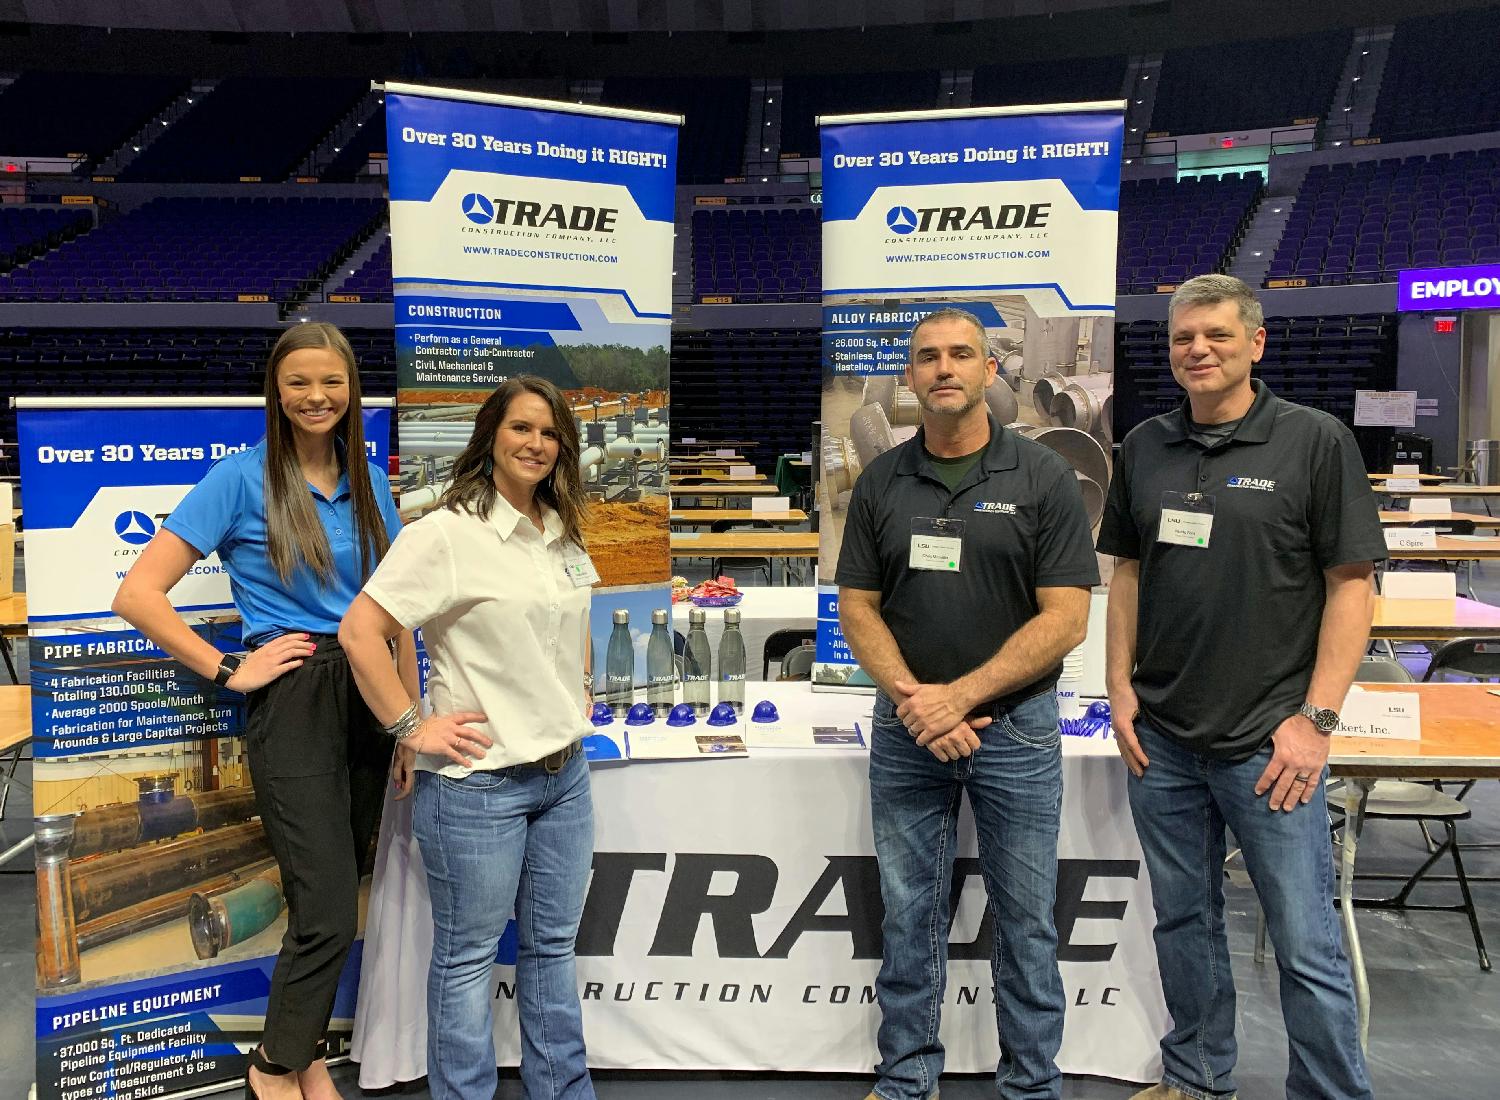 Representatives from our HR department and fabrication shop spent the day at Louisiana State University speaking to students regarding career opportunities at Trade and promoting our Summer Internship Program.